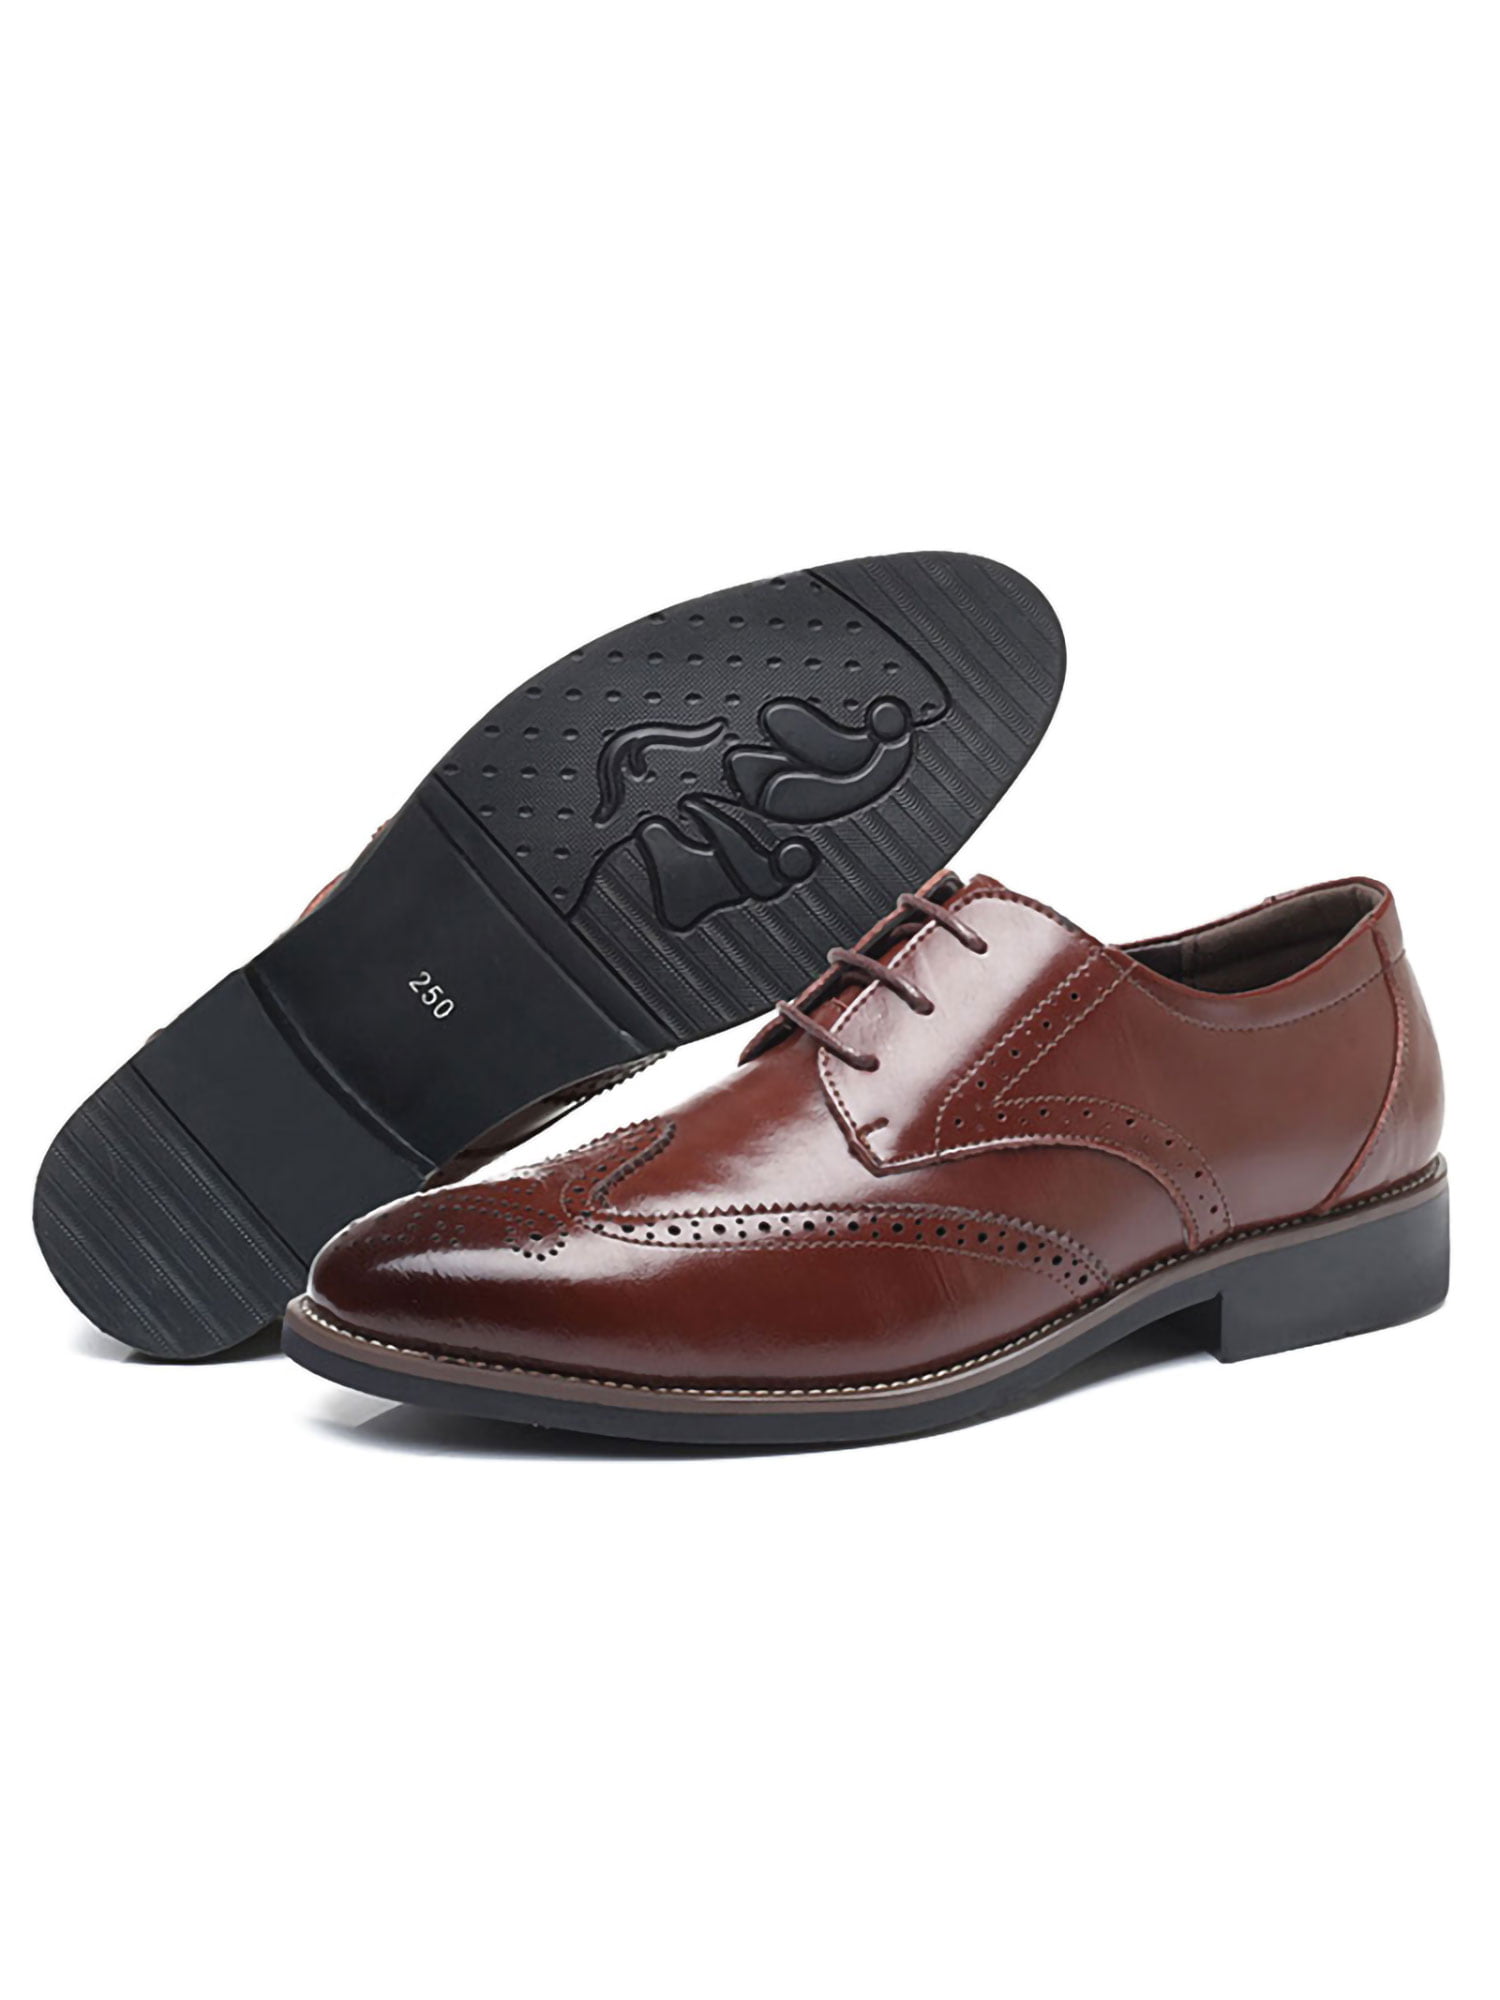 Details about   Brogue Mens Dress Formal Leather Shoes Business Work Office Oxfords Lace up New 